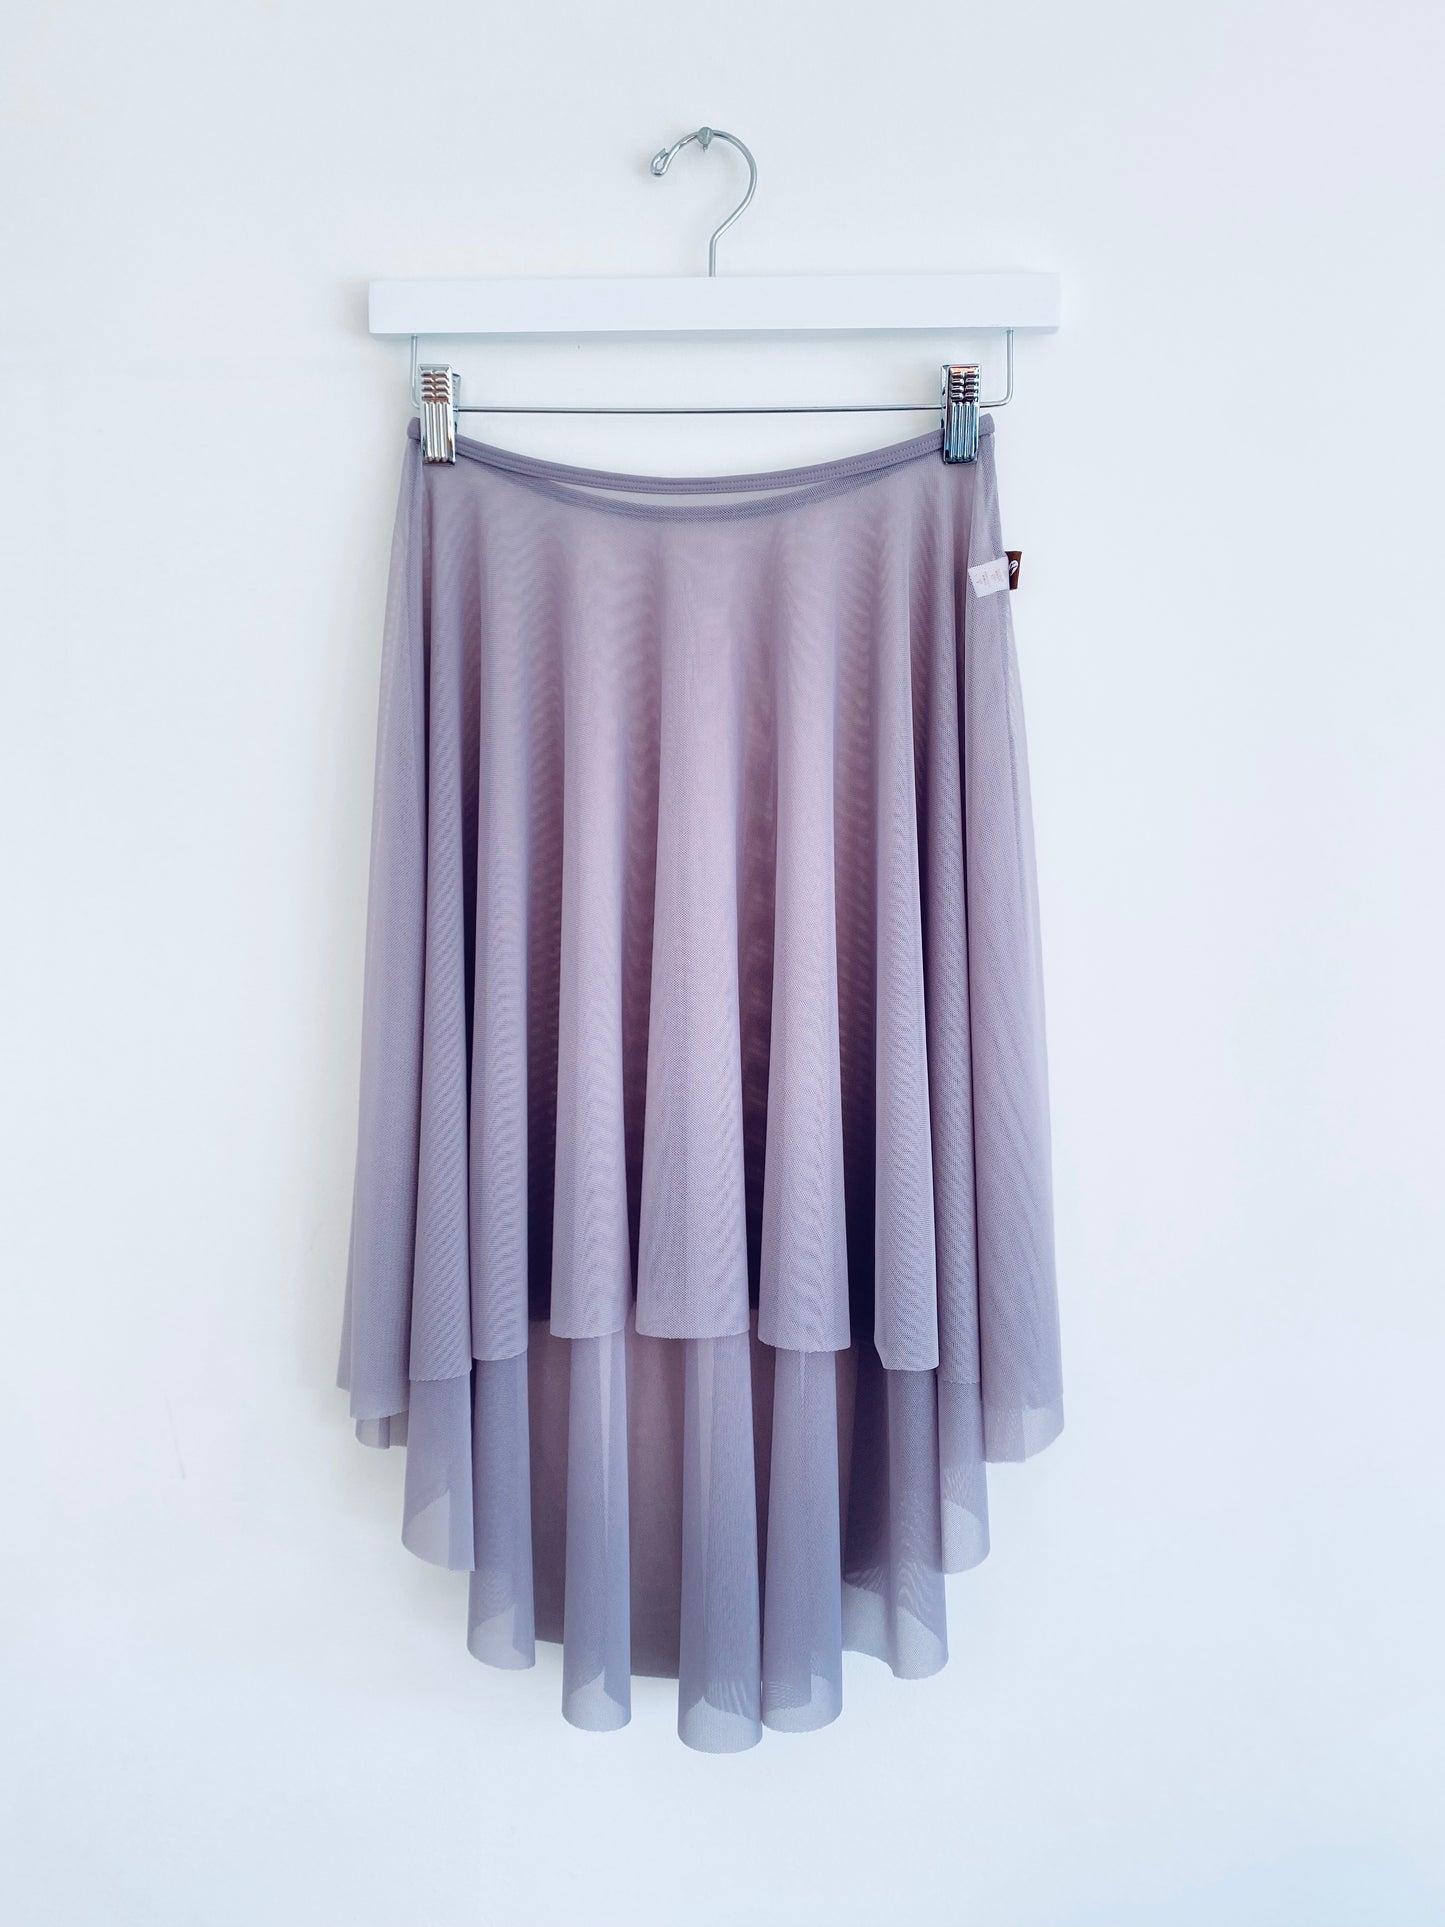 Long ballet practice skirt in Dusky Purple from The Collective Dancewear